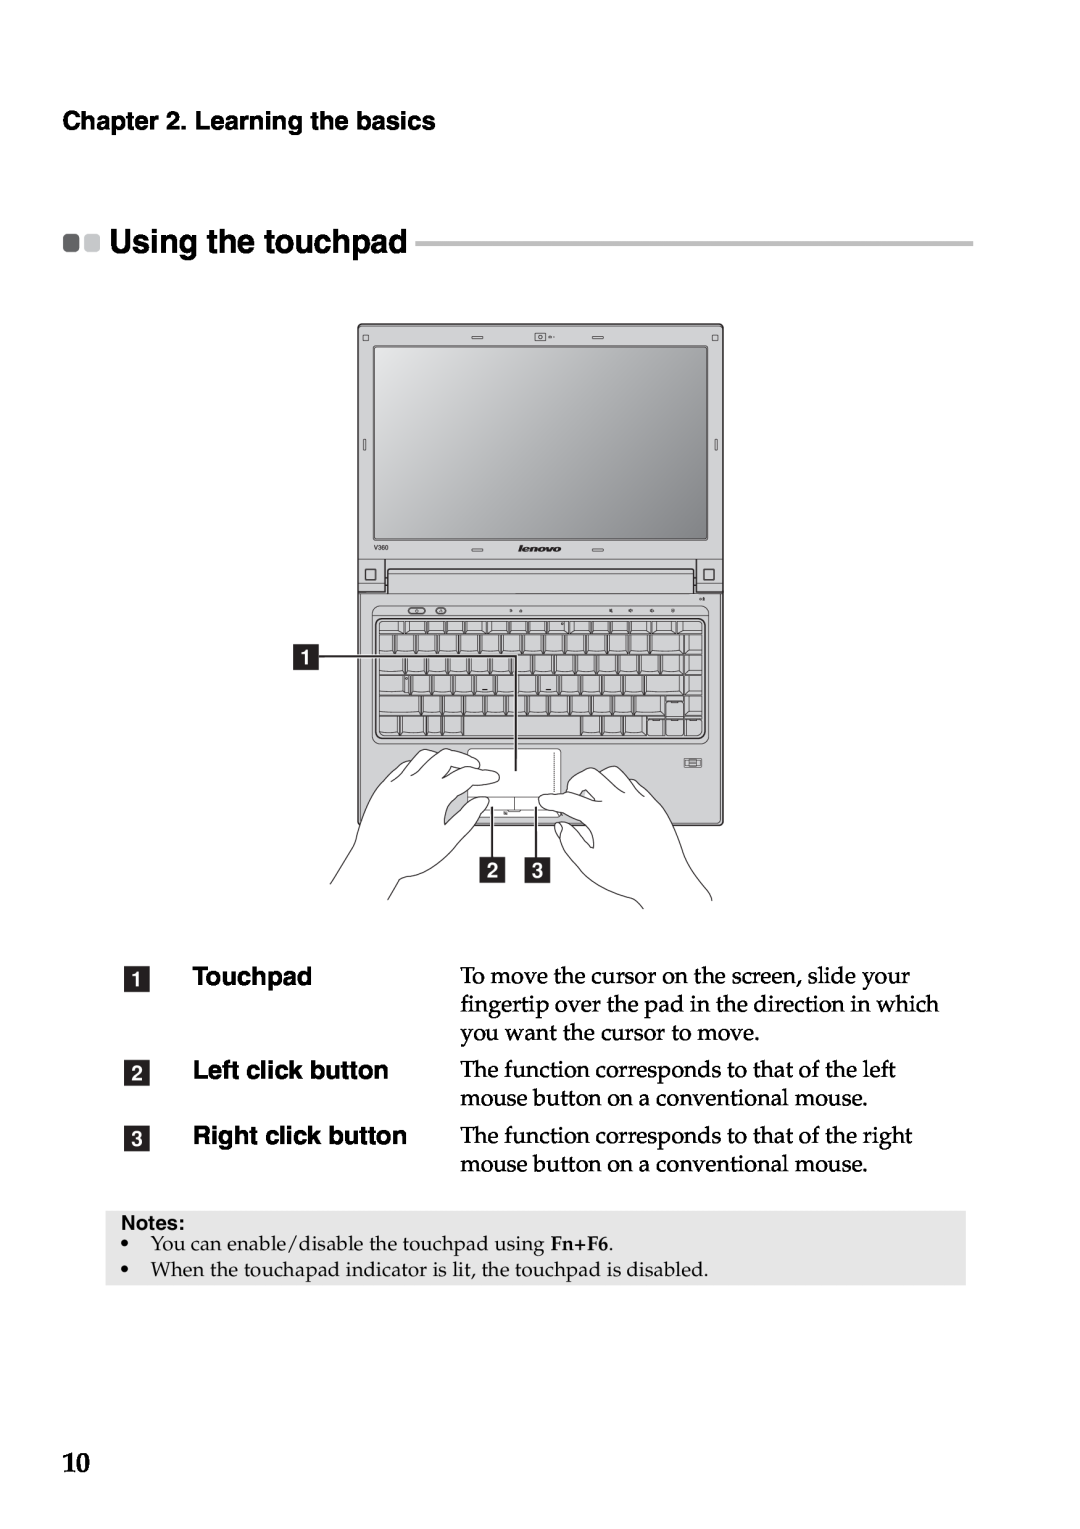 Lenovo V360 manual Learning the basics, Using the touchpad, a Touchpad 